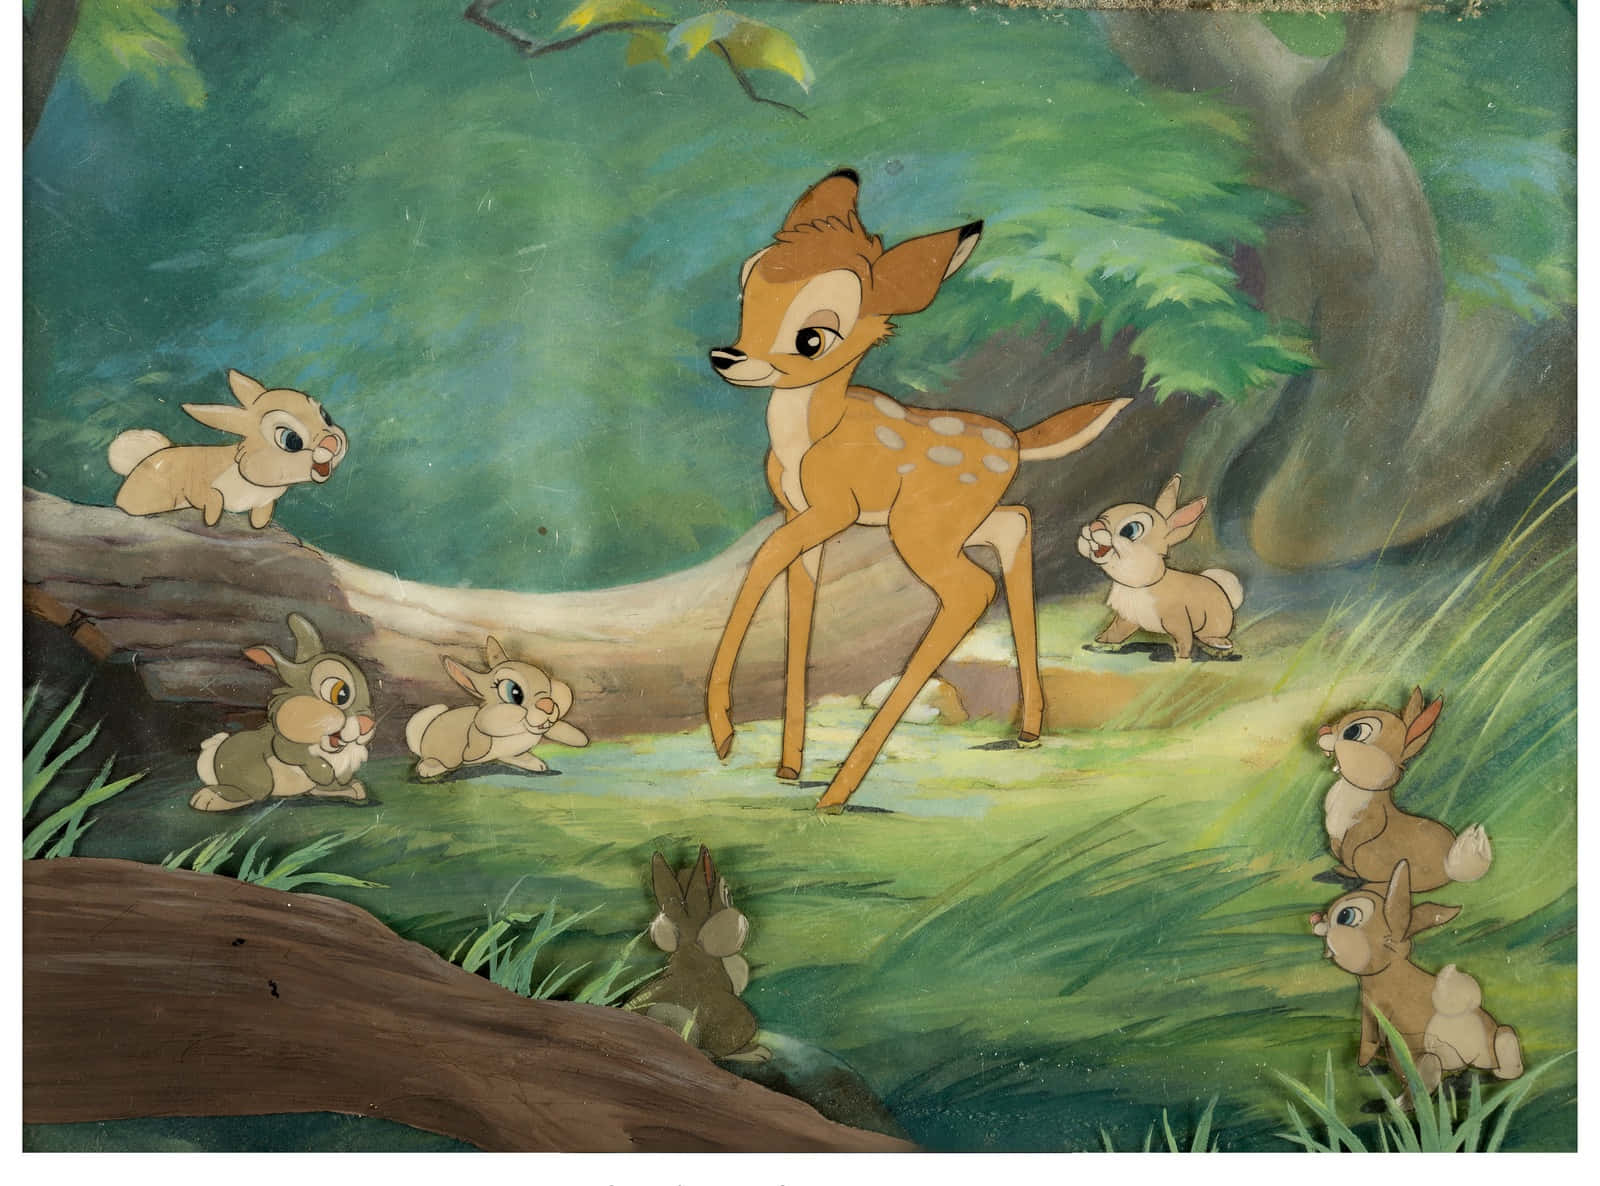 A beloved Disney character, Bambi, perched in the forest